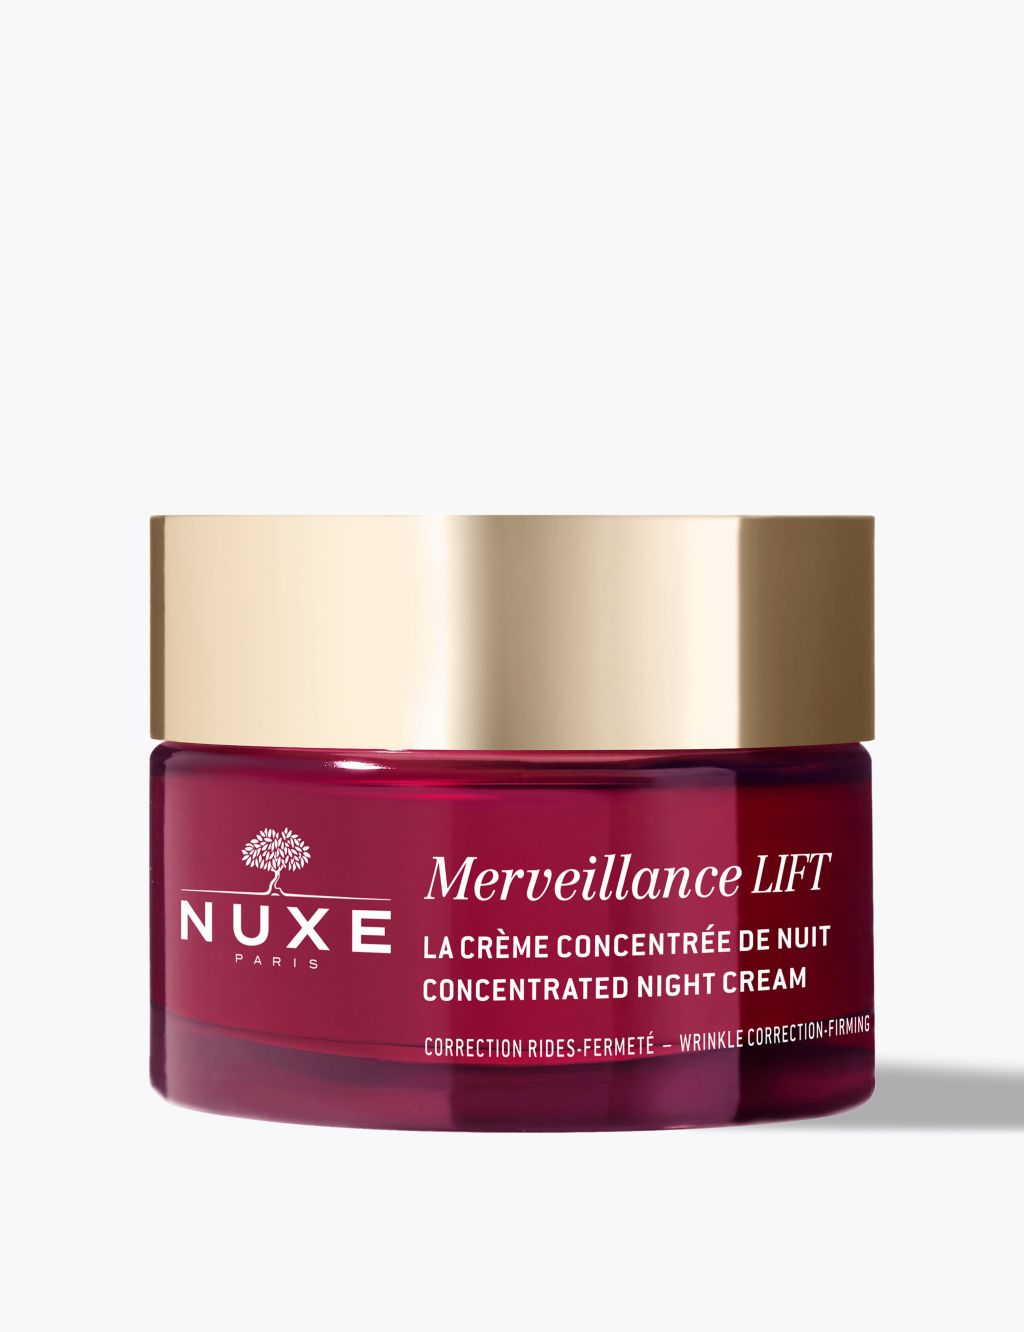 Merveillance Lift Concentrated Night Cream 50ml 3 of 6